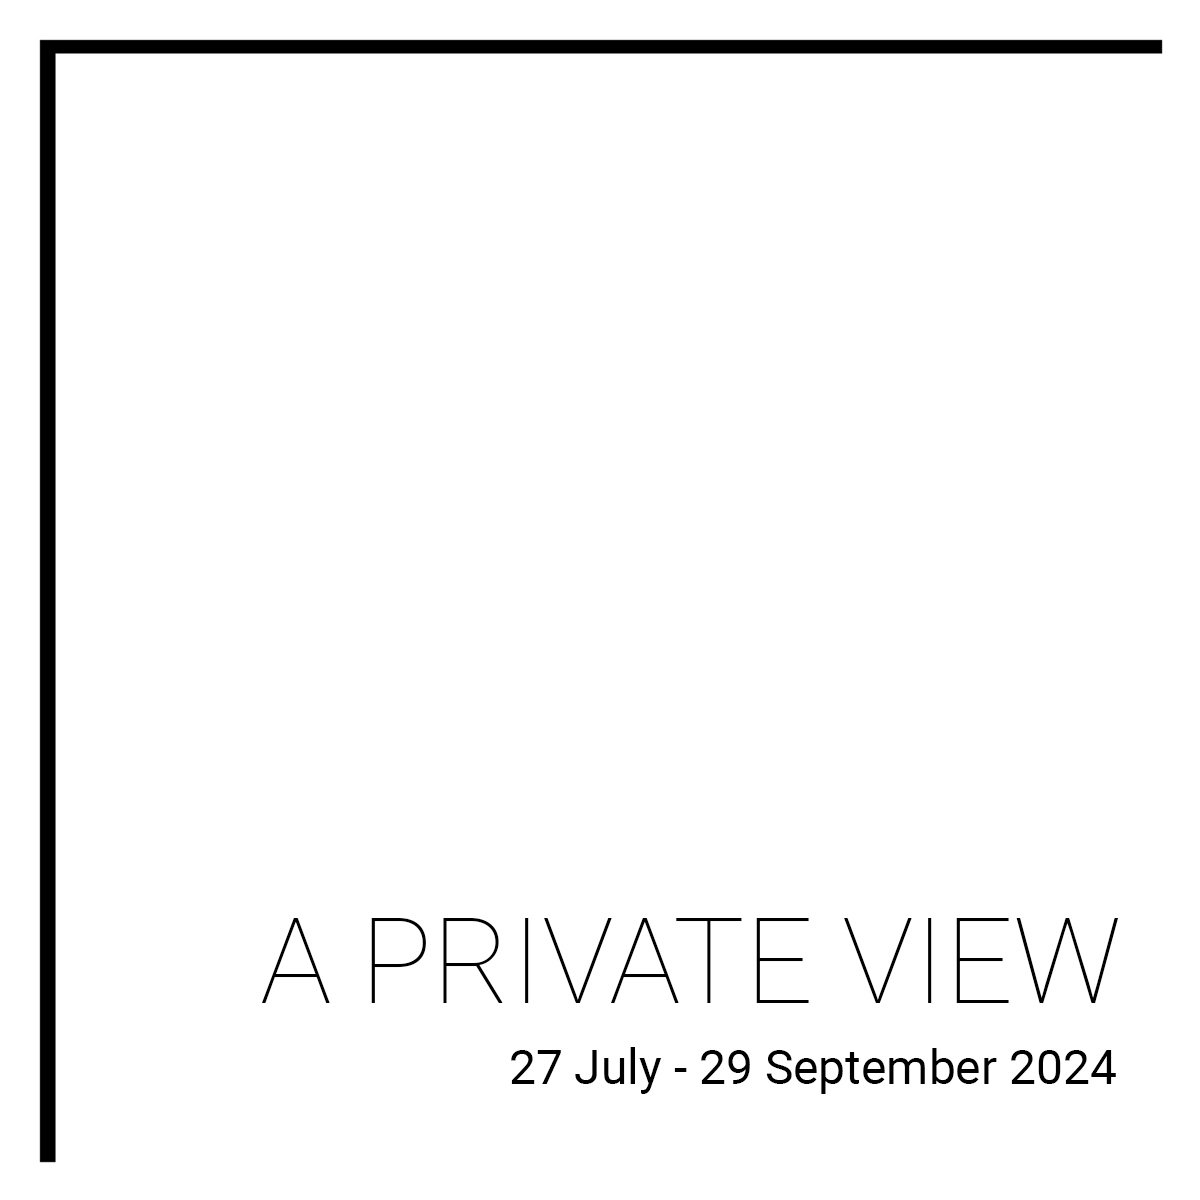 A PRIVATE VIEW - in Gallery only Exhibition GALLERY.2 - 27 July - 29 September 2024 Charles Blackman, Judy Cassab, Ray Crooke, Tim Storrier, Michael Kempson and more original artist prints and works from private collections Sydney.